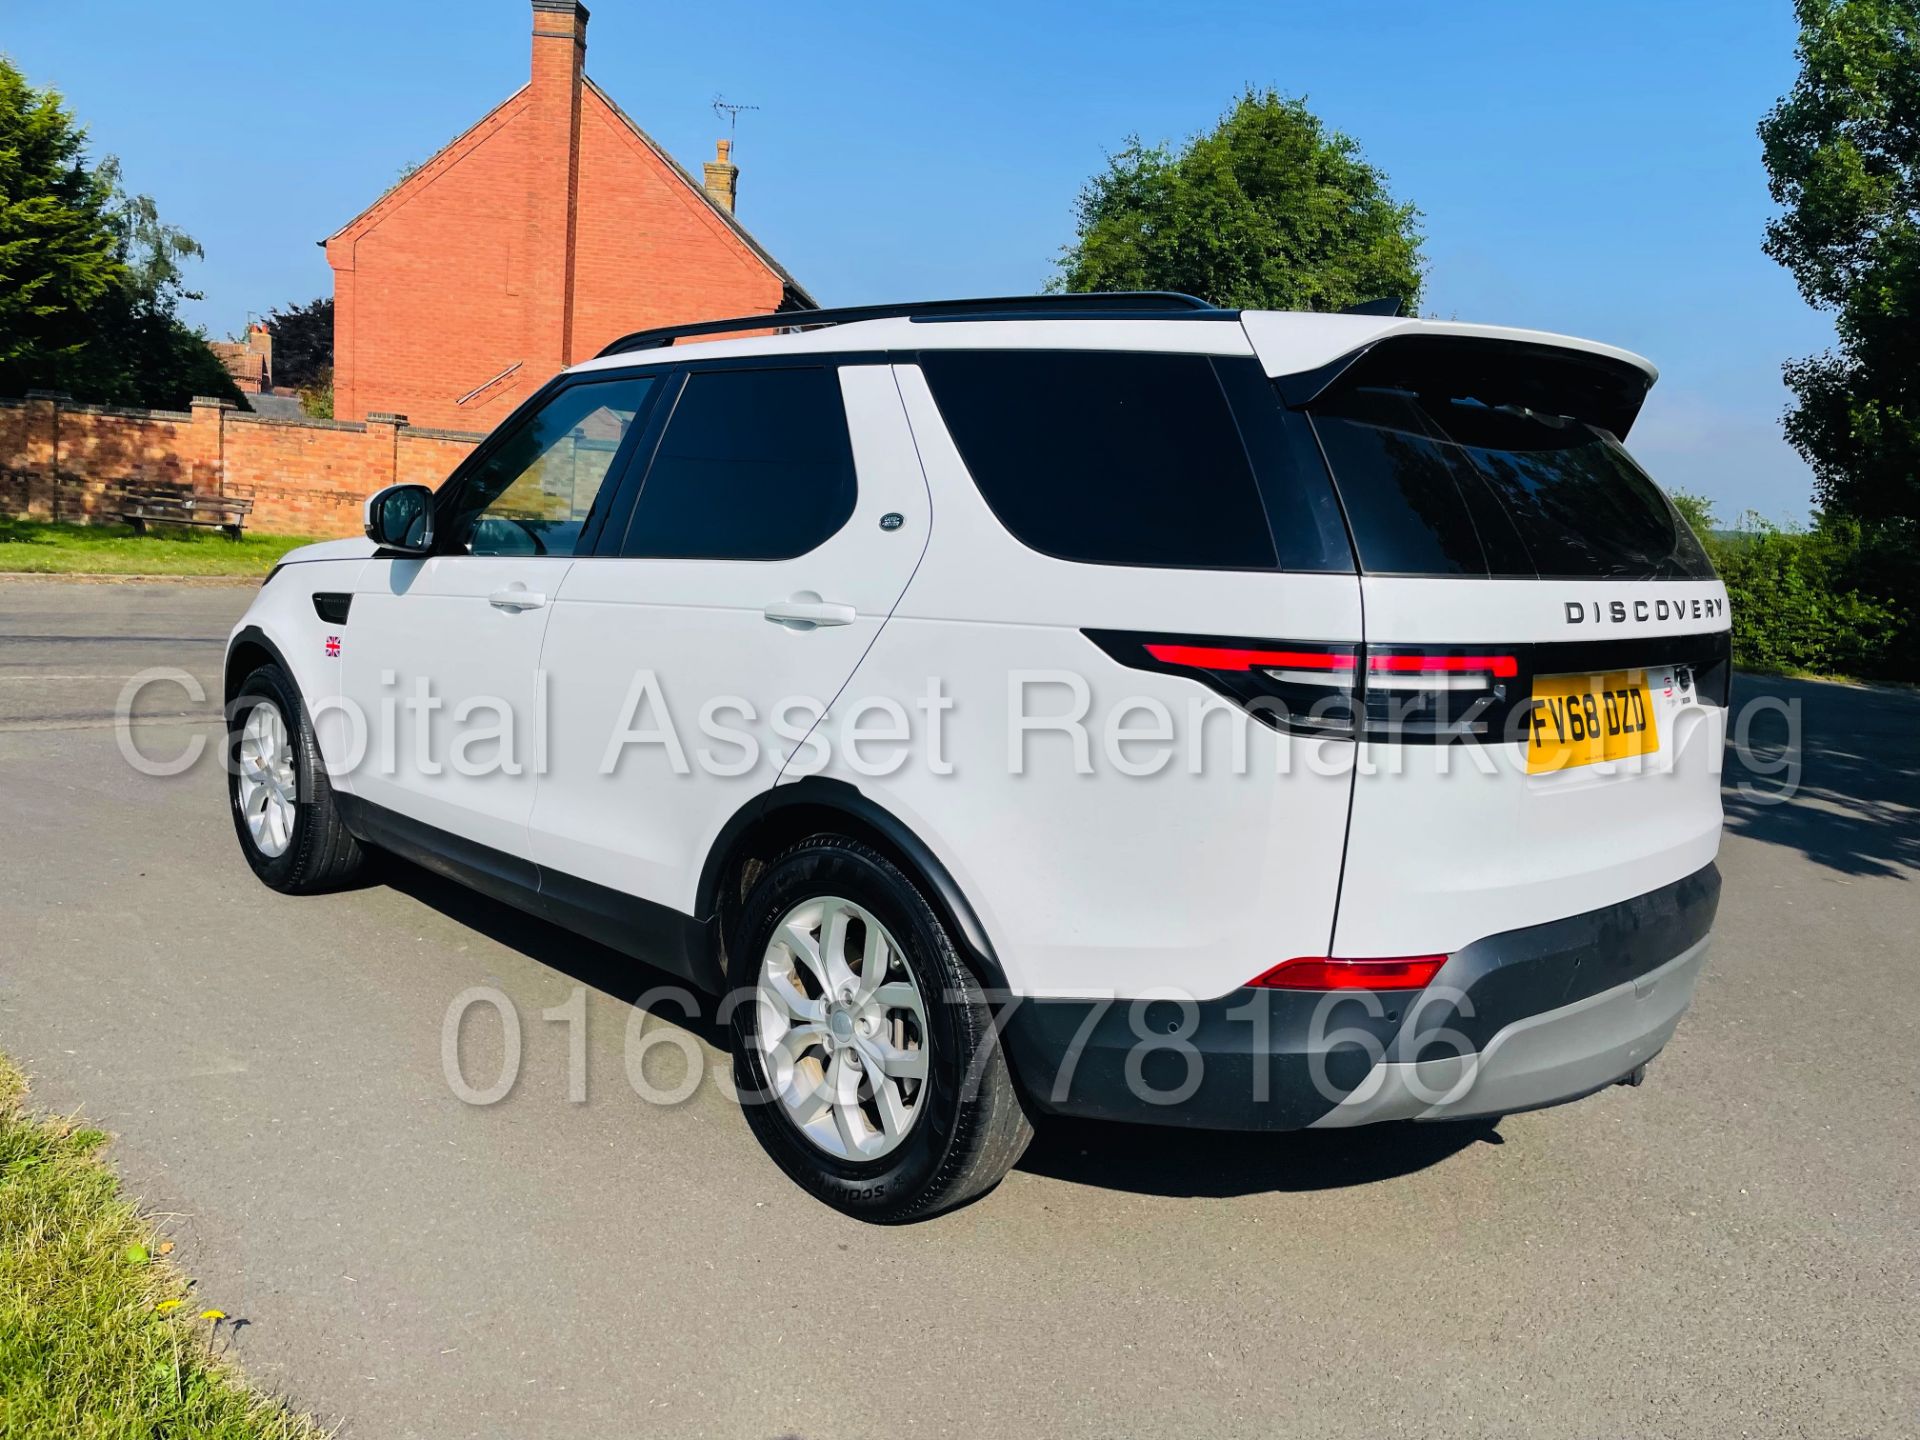 LAND ROVER DISCOVERY 5 *SE EDITION* SUV (2019 - EURO 6) '3.0 TD6 -306 BHP- 8 SPEED AUTO' *HUGE SPEC* - Image 10 of 47